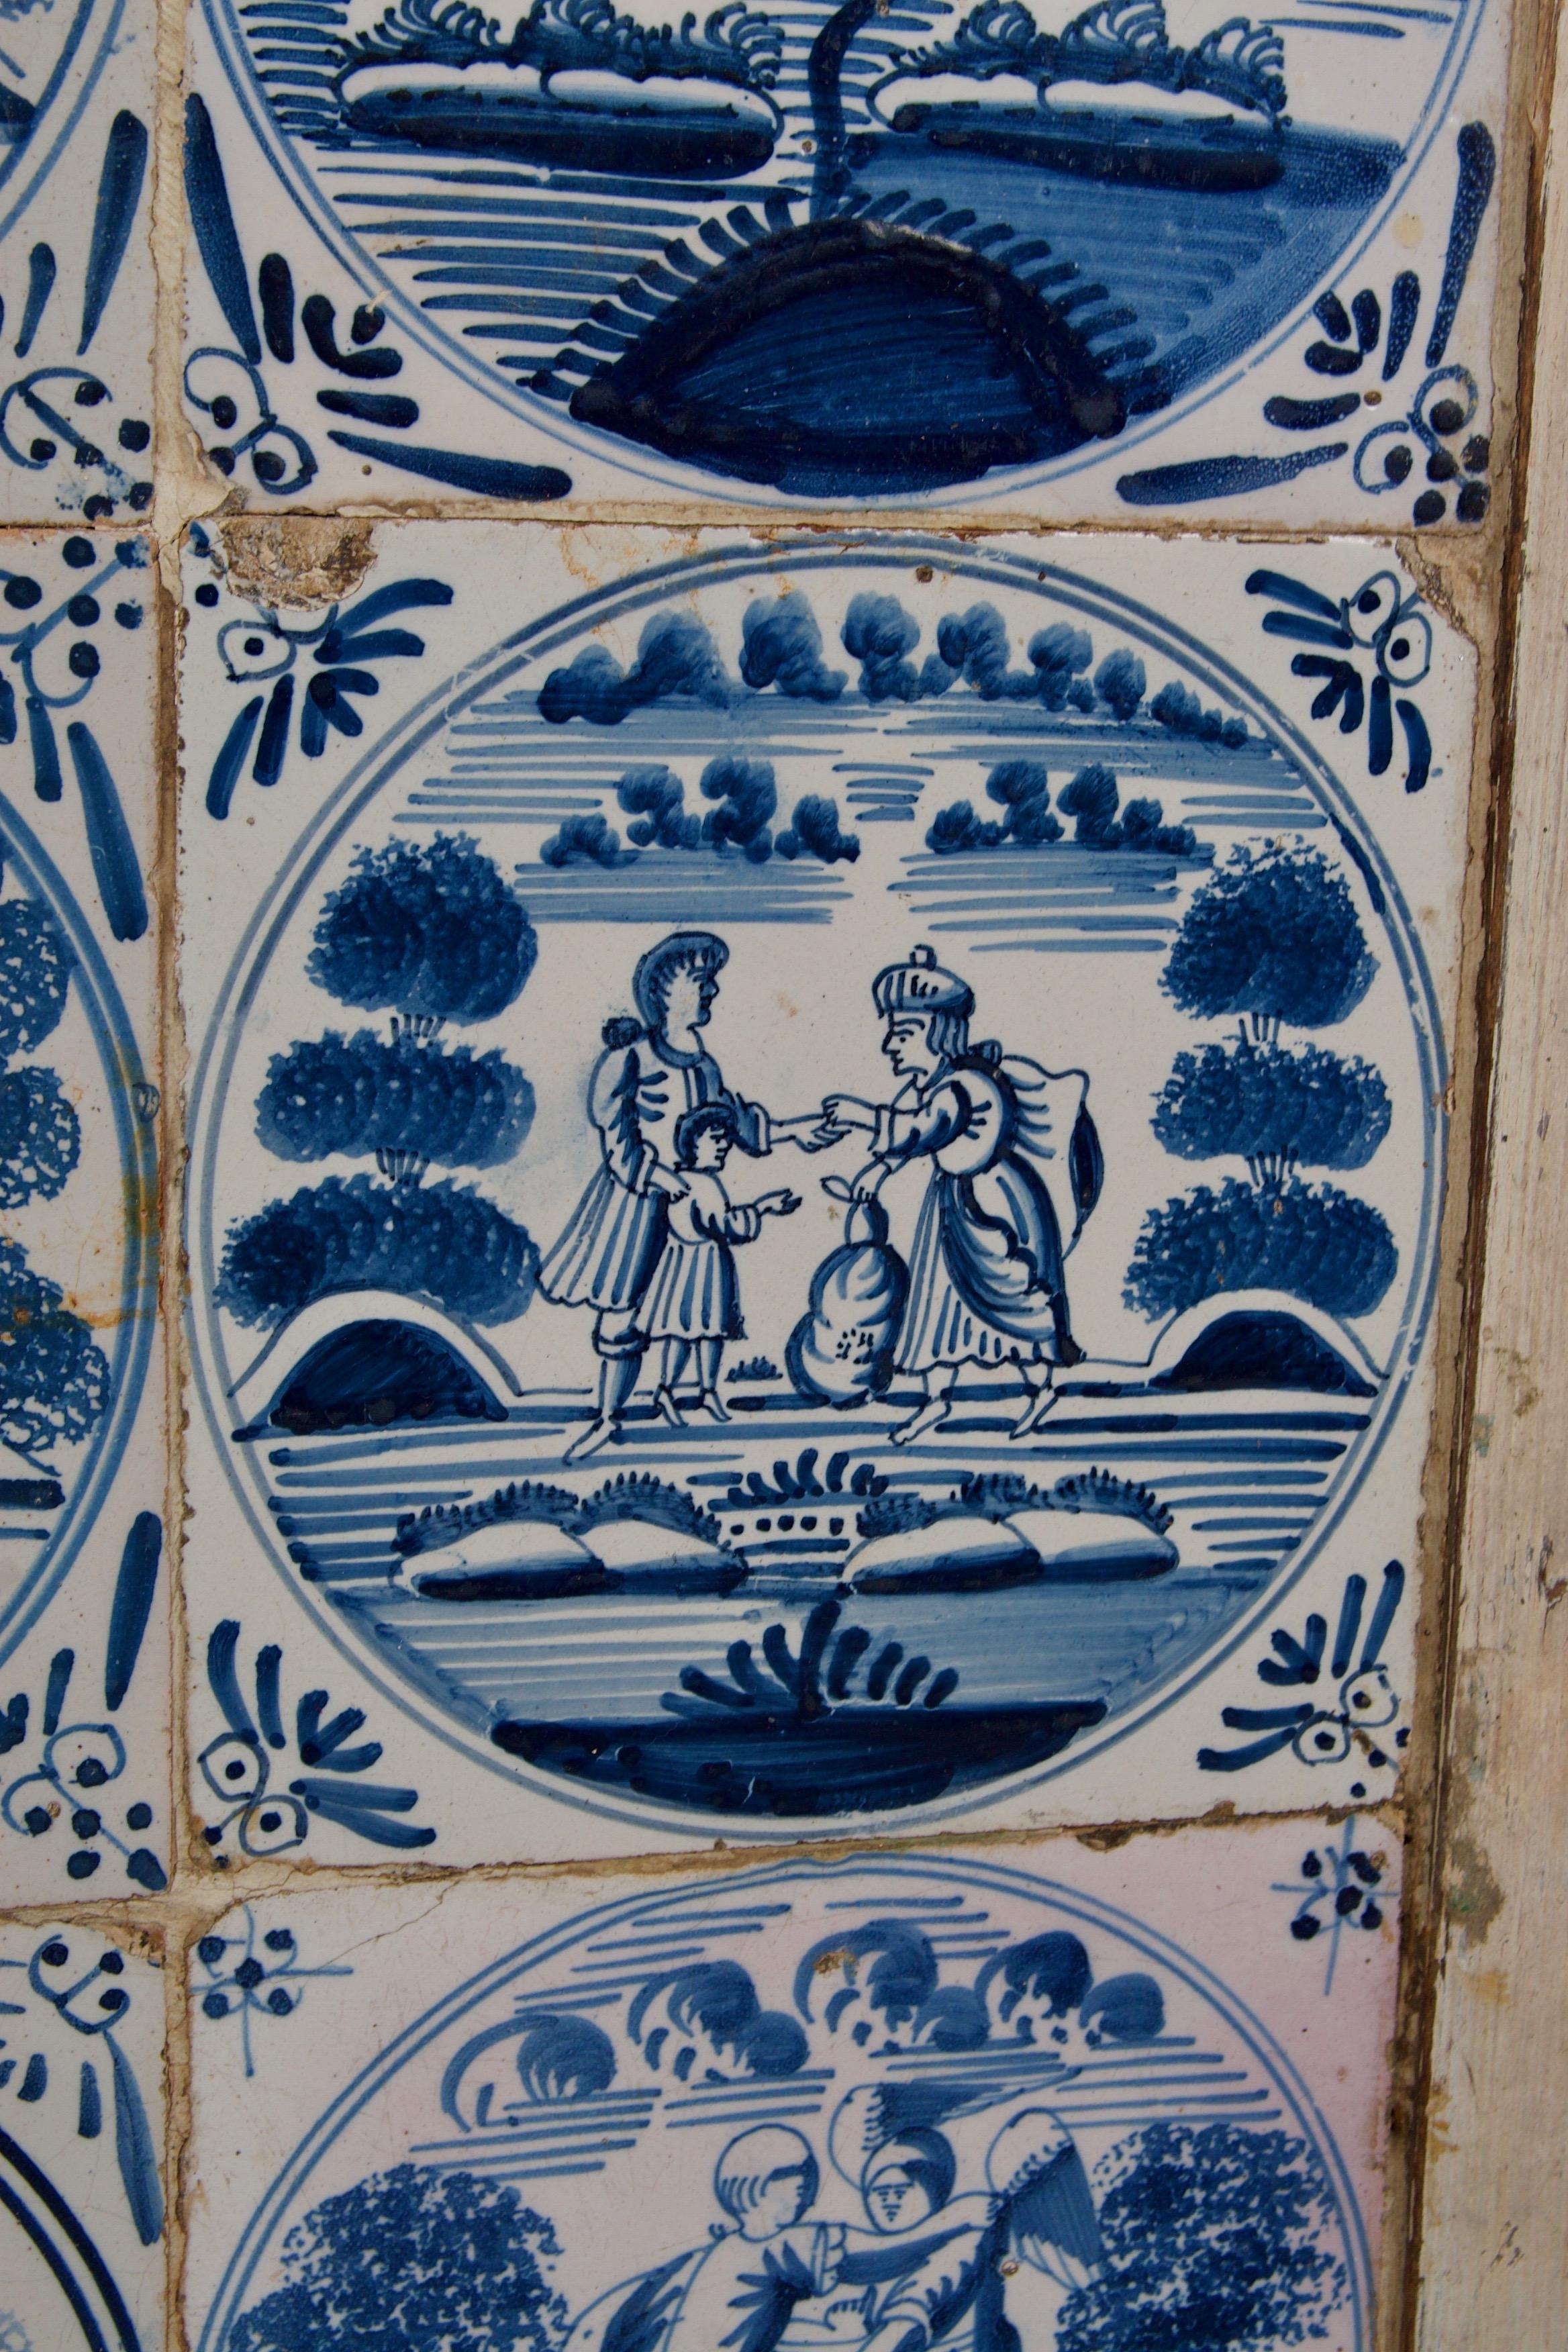 17th Cent. Delft Tile Inset into a 18th Cent. Dutch Side Table with Paint Decor 5